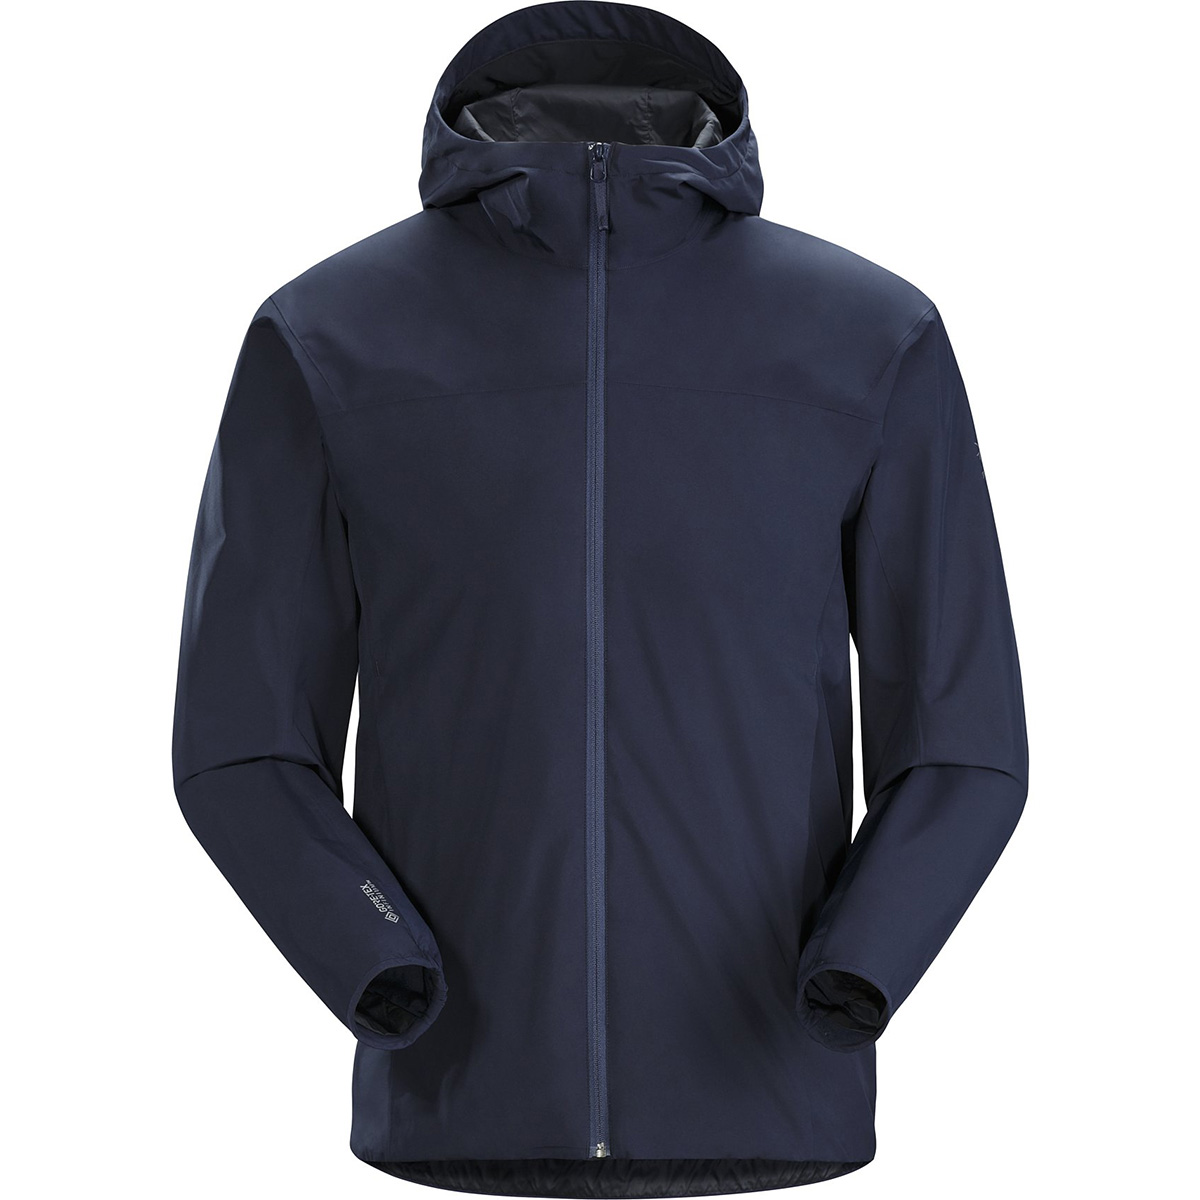 Arc'teryx Solano Hoody, men's, discontinued Fall 2019 colors (free ...